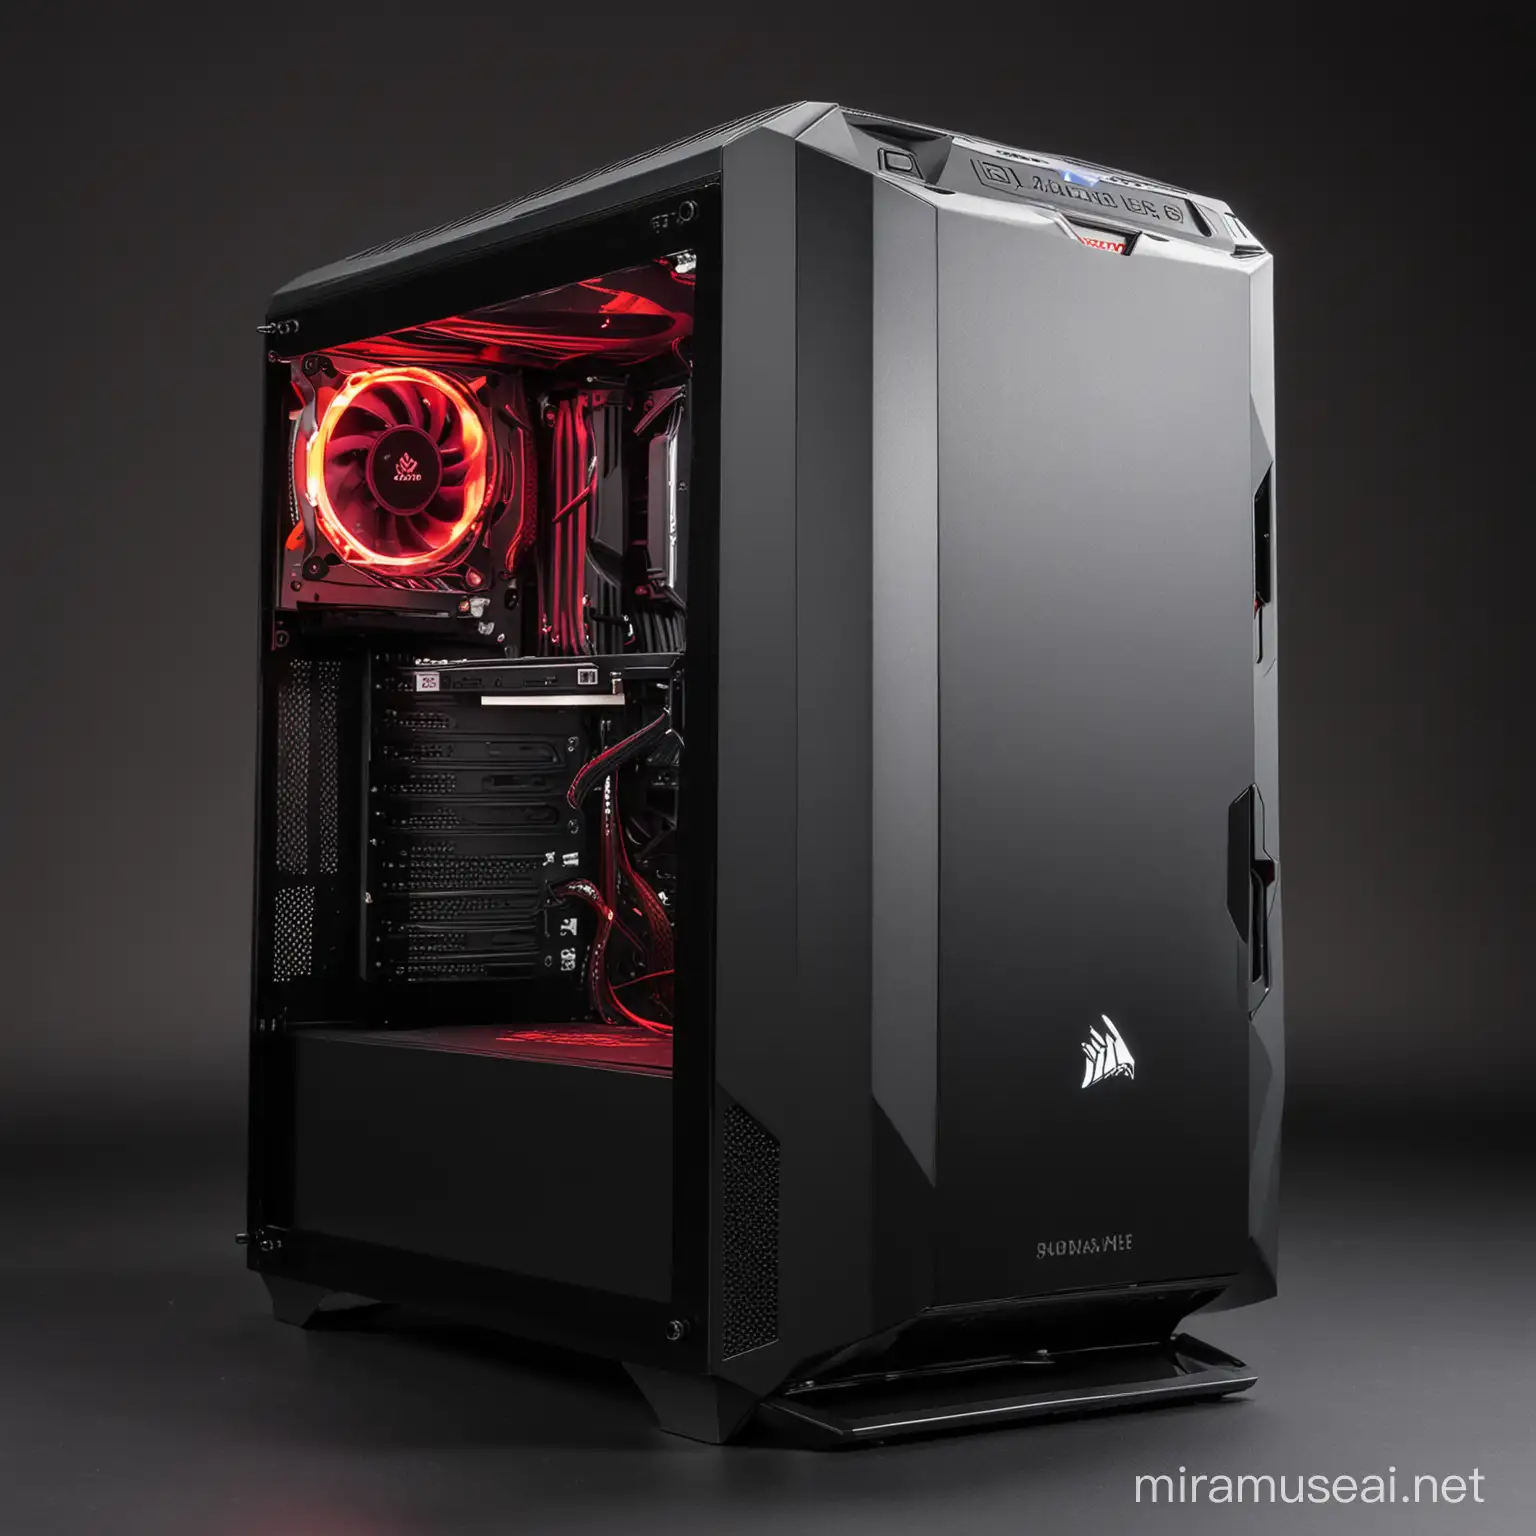 Innovative Gaming Desktop with Advanced Hardware